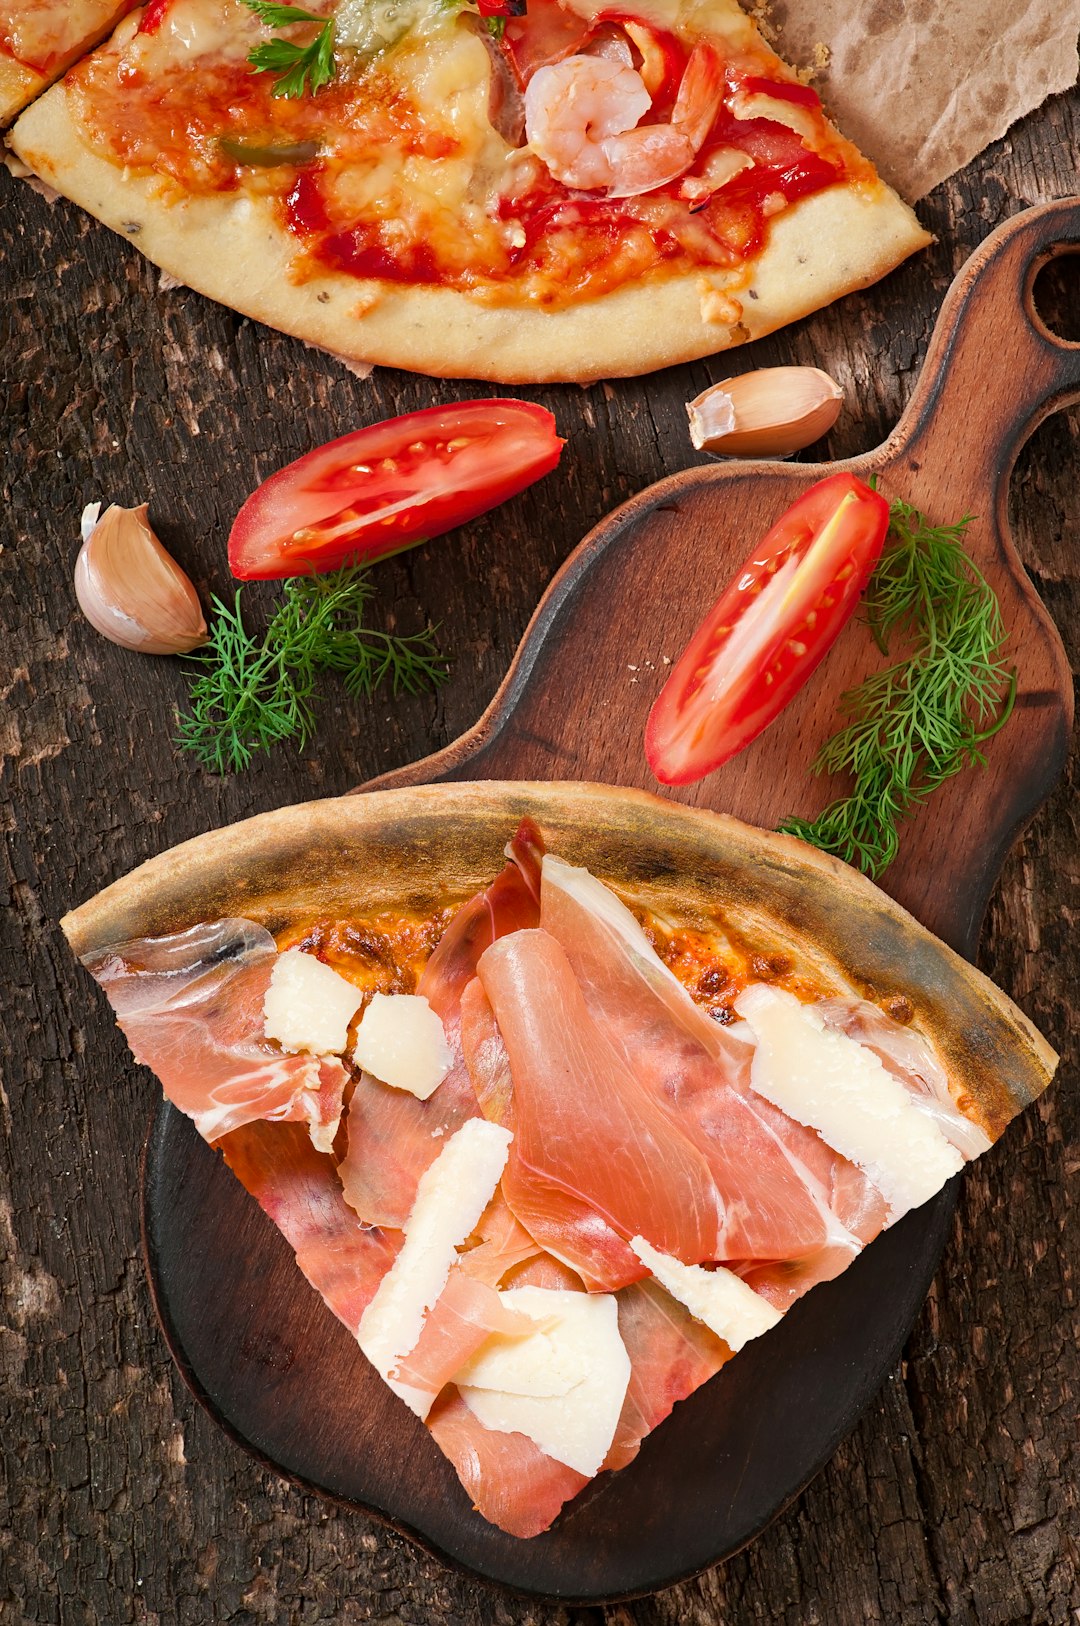 What Is Prosciutto? A Guide To The Italian Delicacy